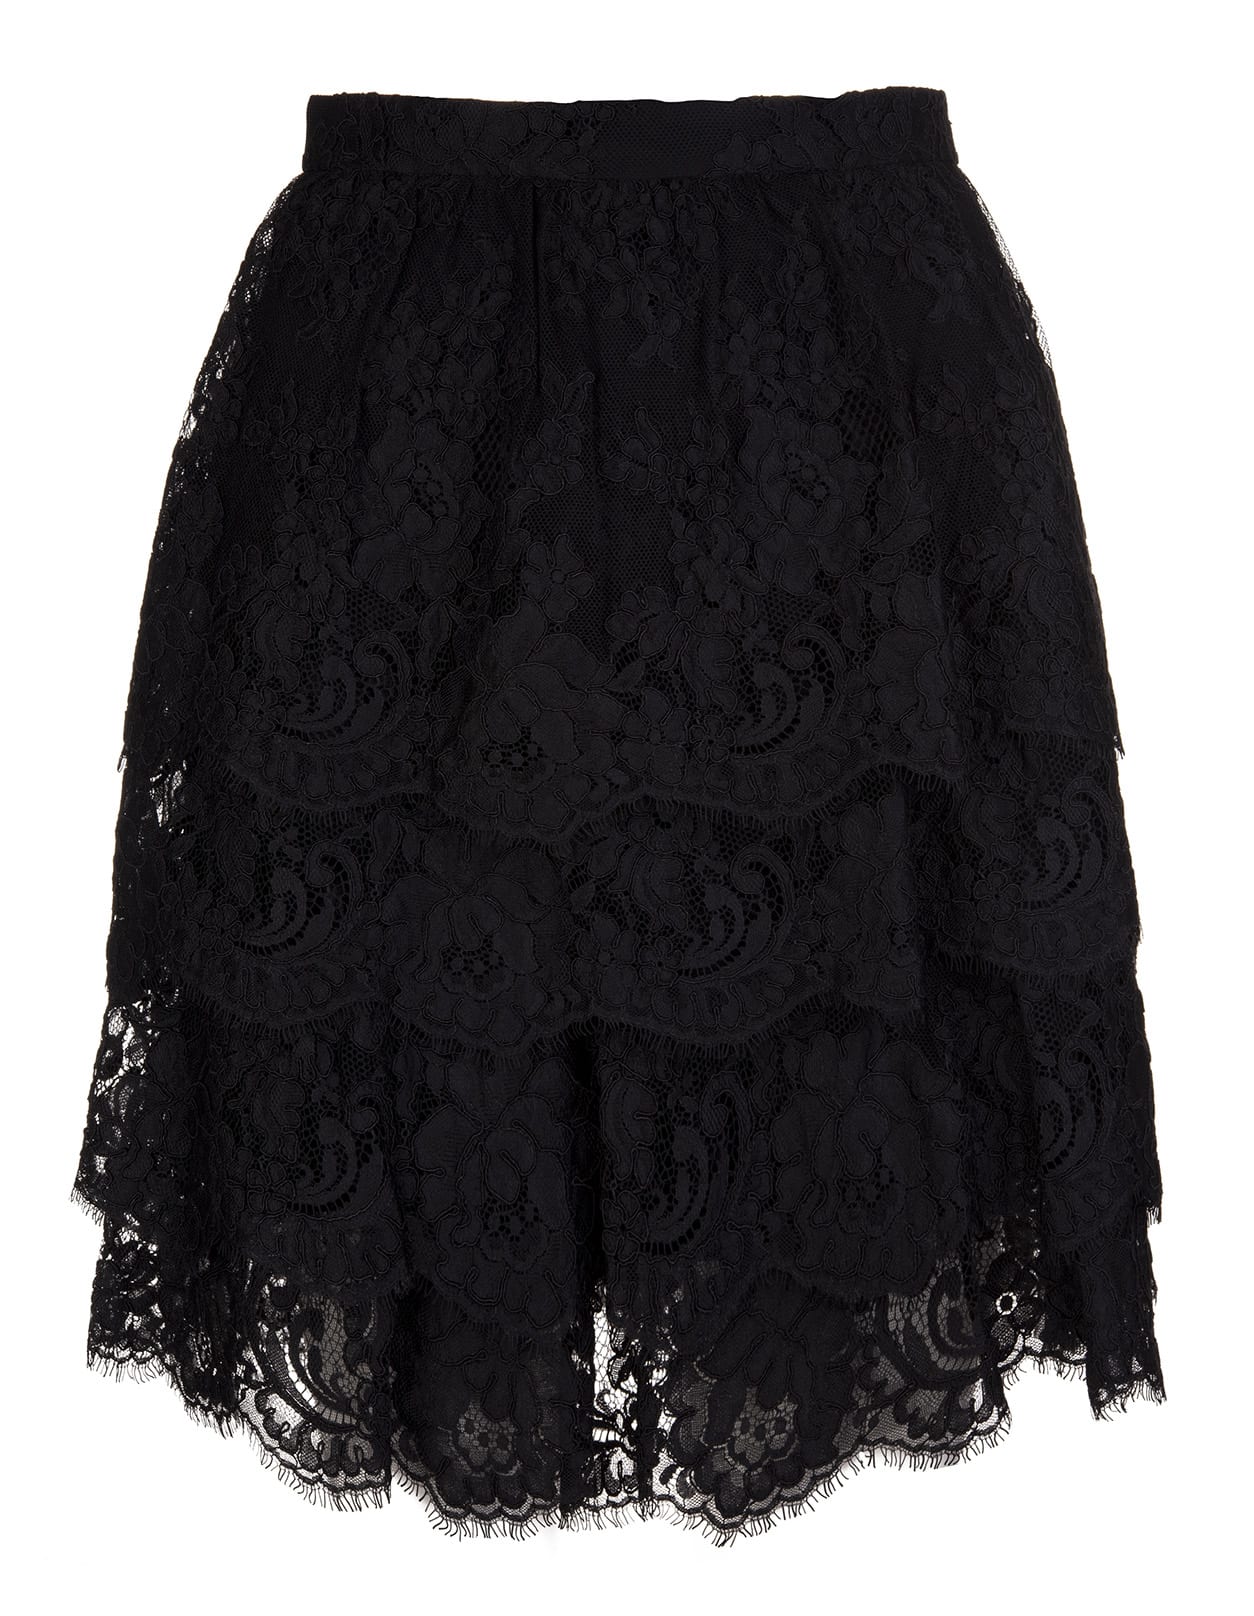 Ermanno Scervino Short Skirt With Flounces In Black Lace